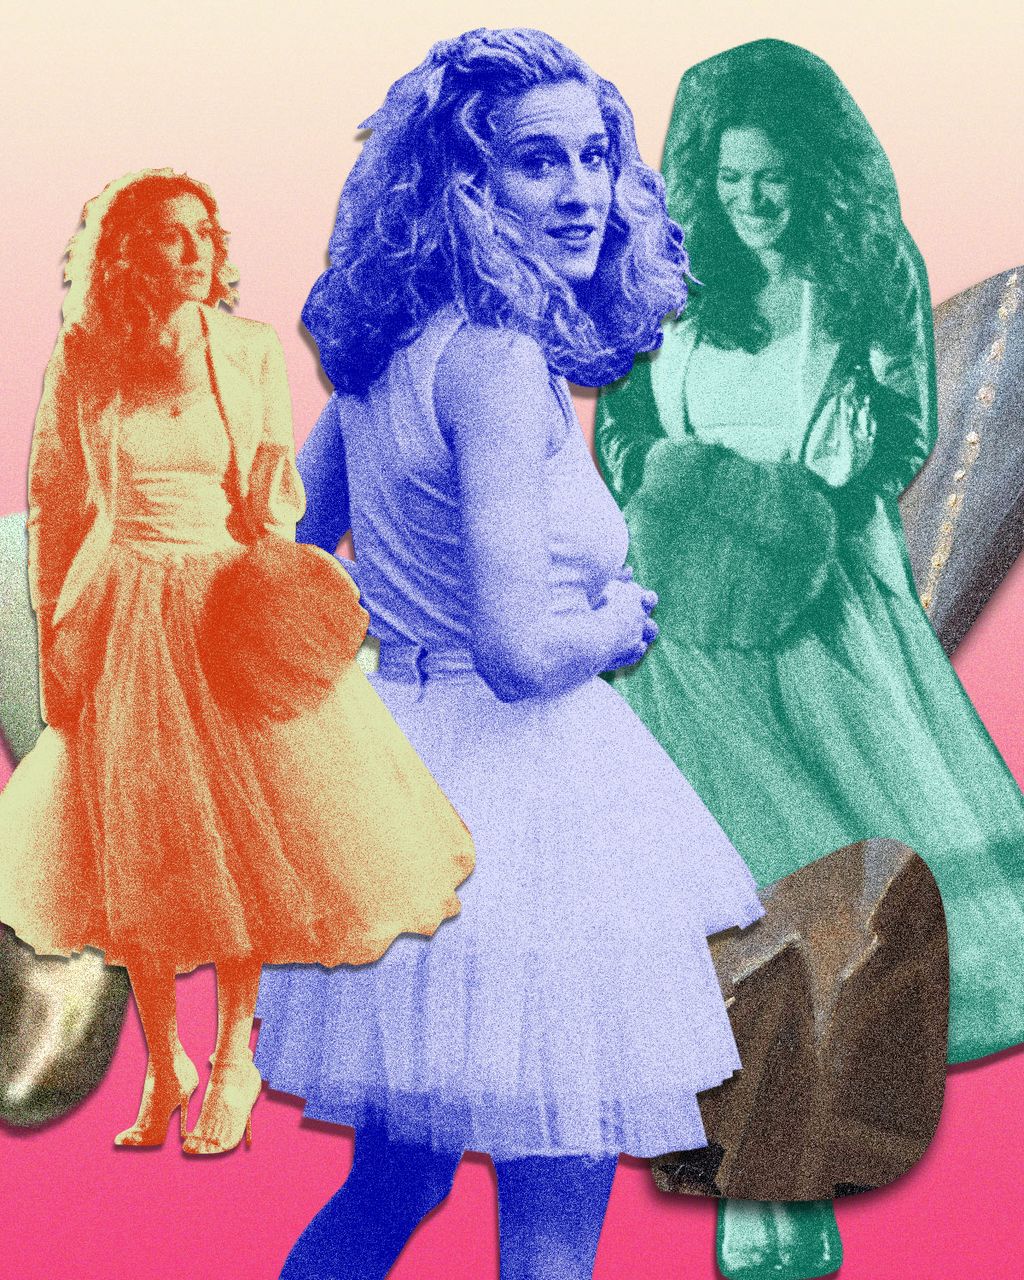 Why Did Carrie Bradshaw Wear Tutus on Sex and the City? picture